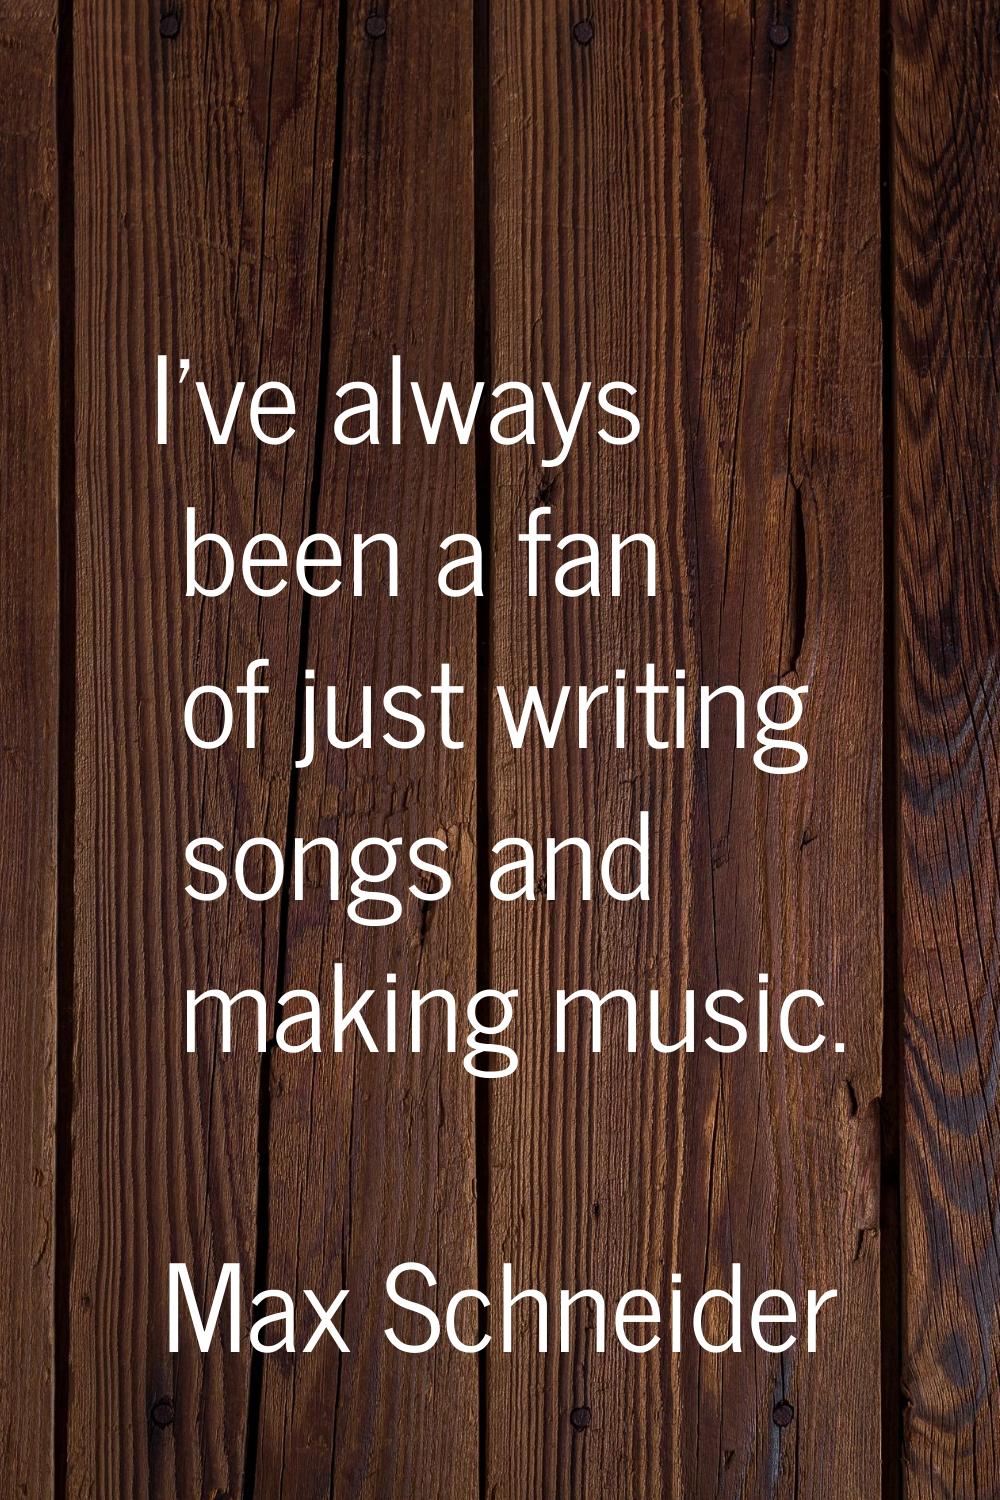 I've always been a fan of just writing songs and making music.